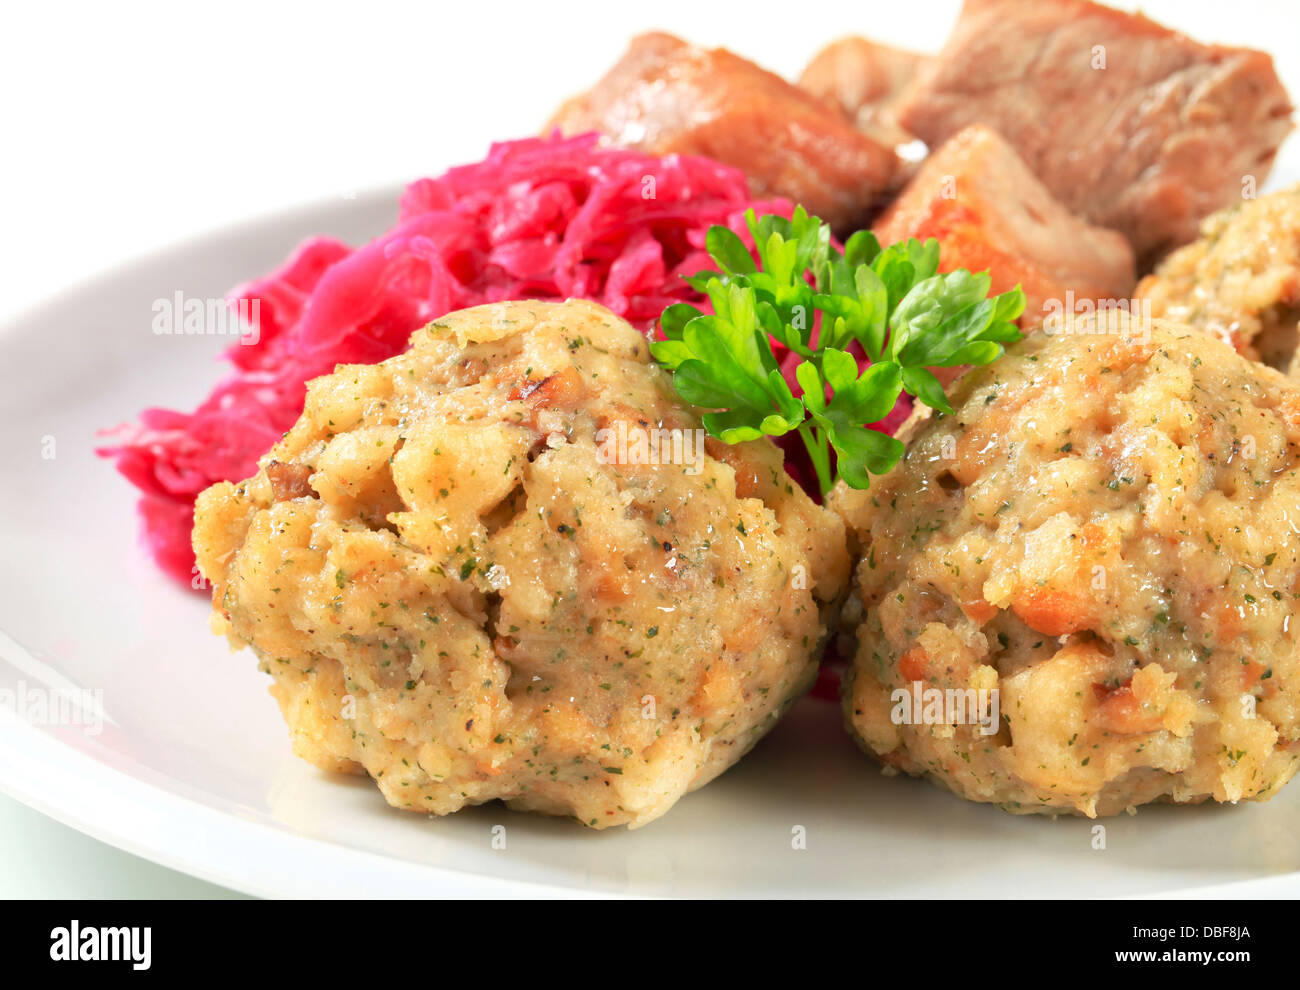 Dish of roast pork with Tyrolean dumplings and red kraut Stock Photo